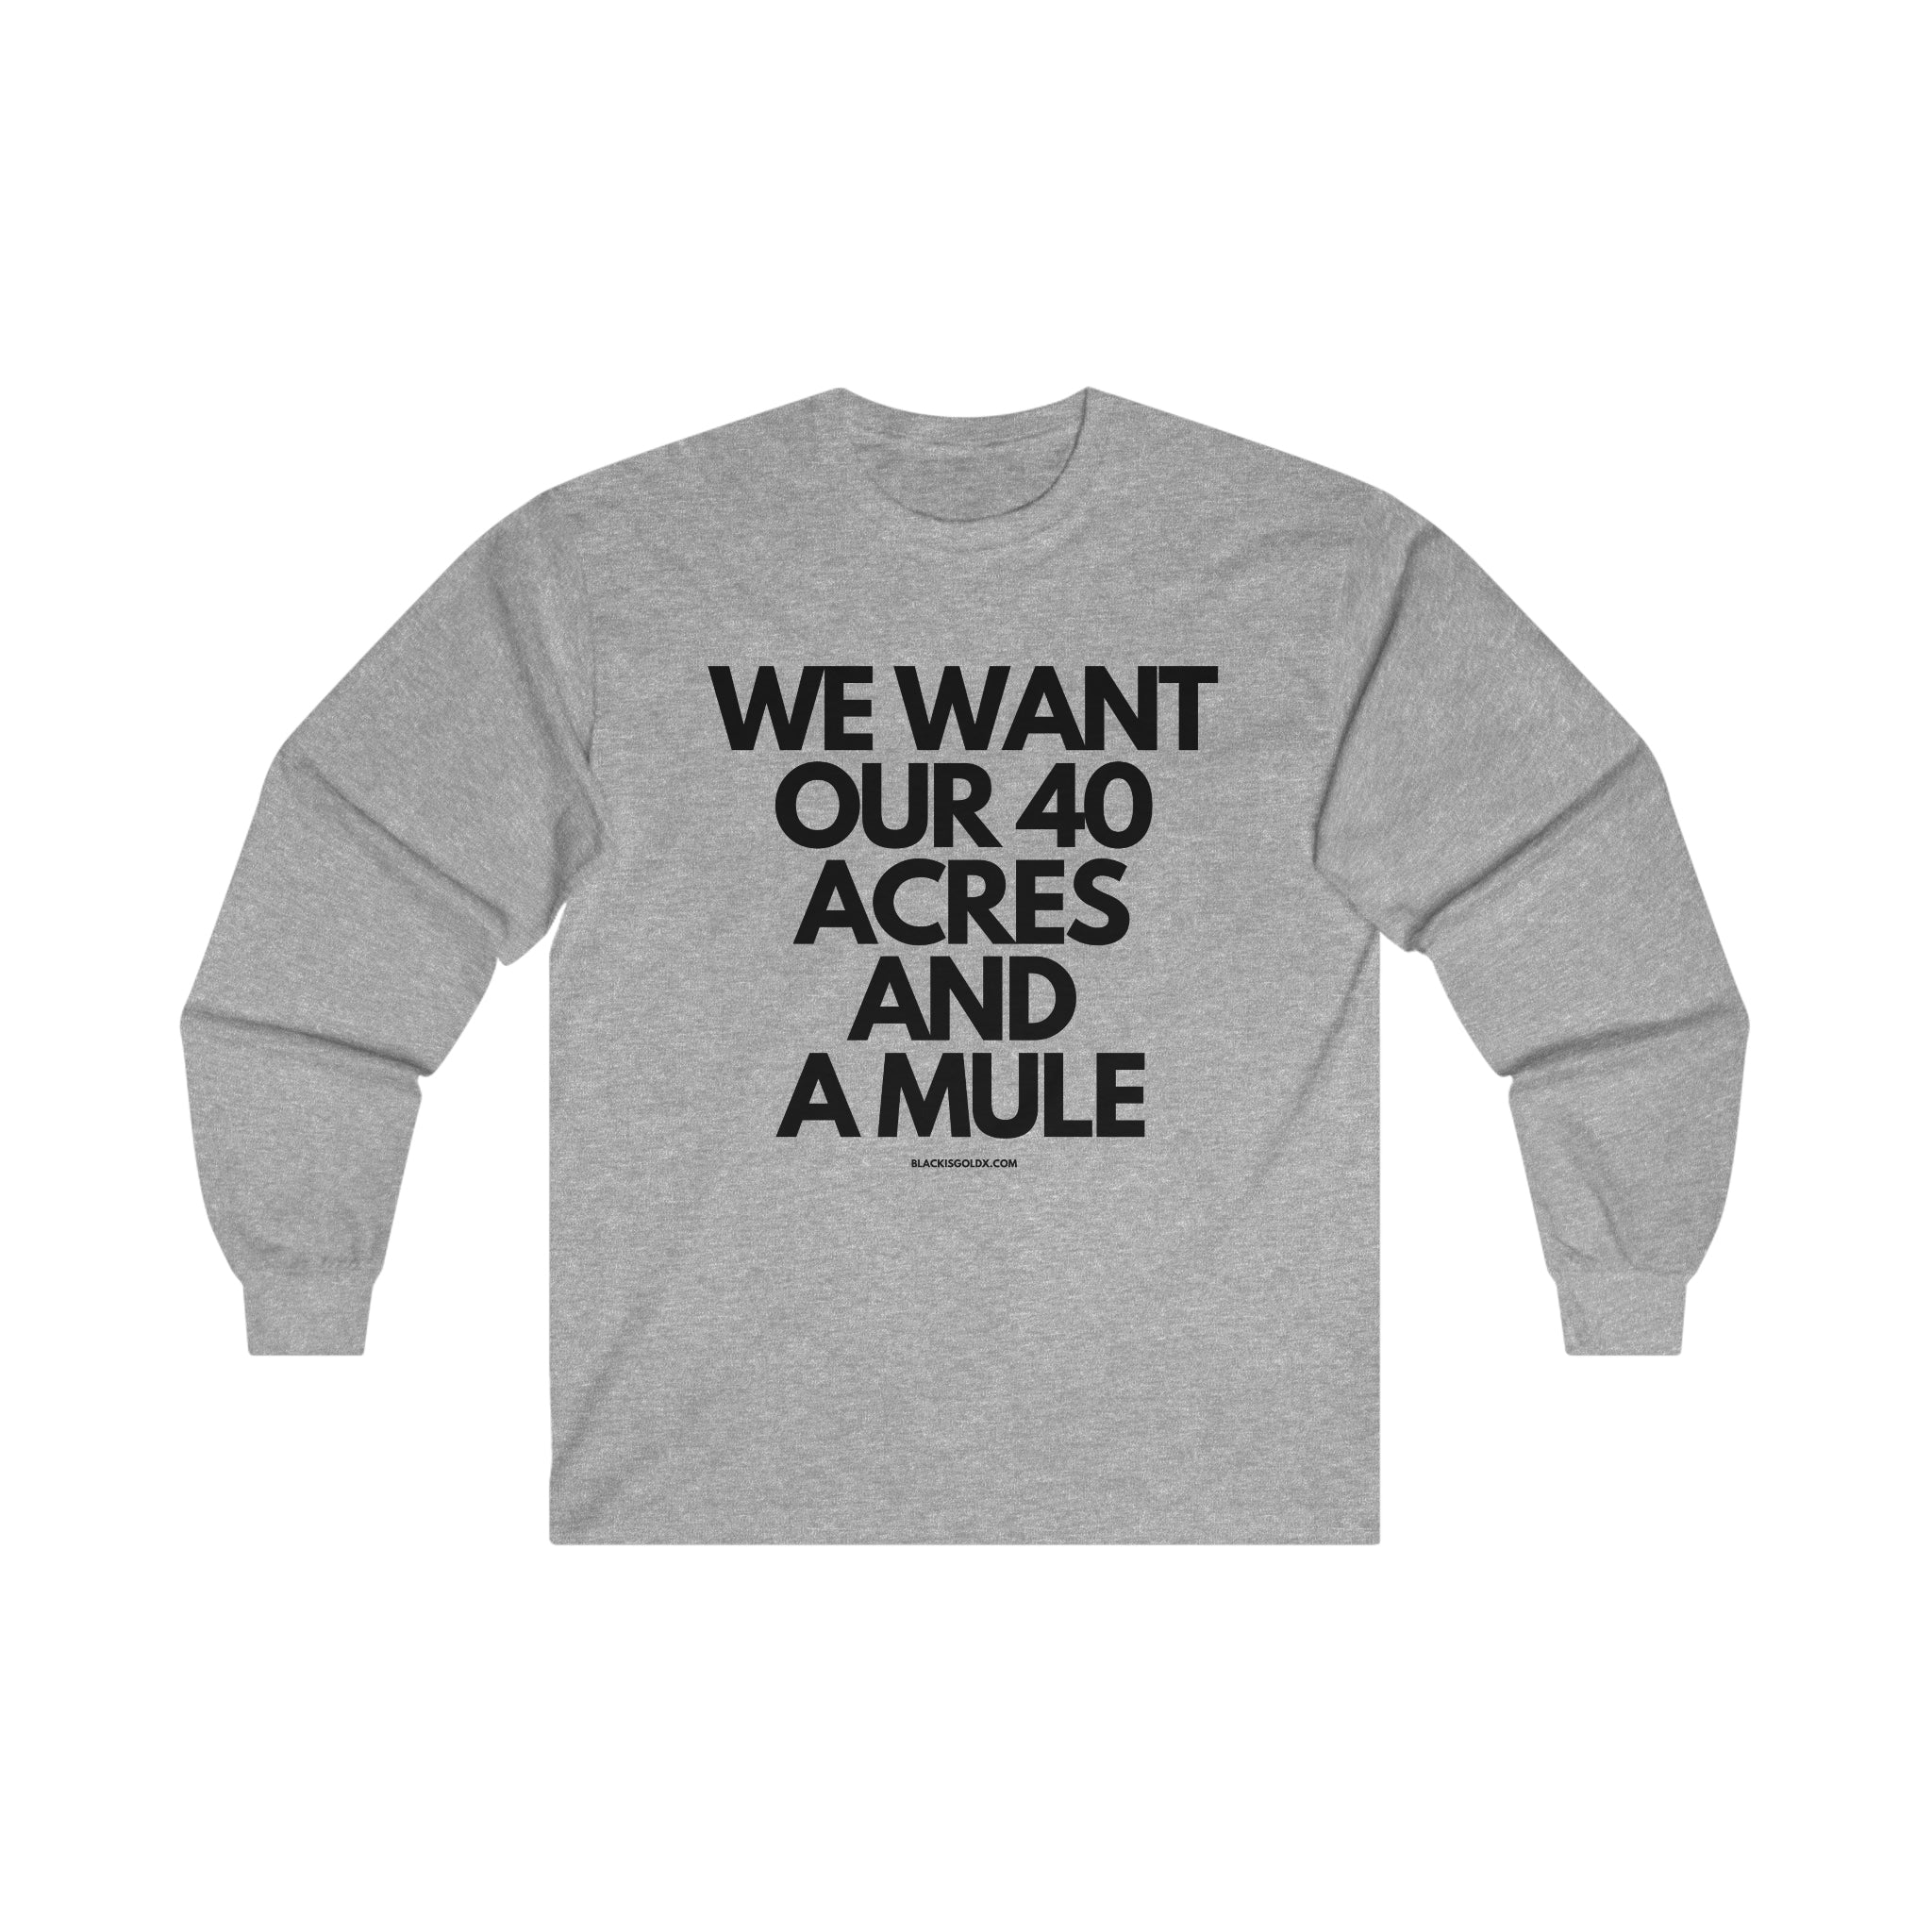 We Want our 40 Acres and a Mule.